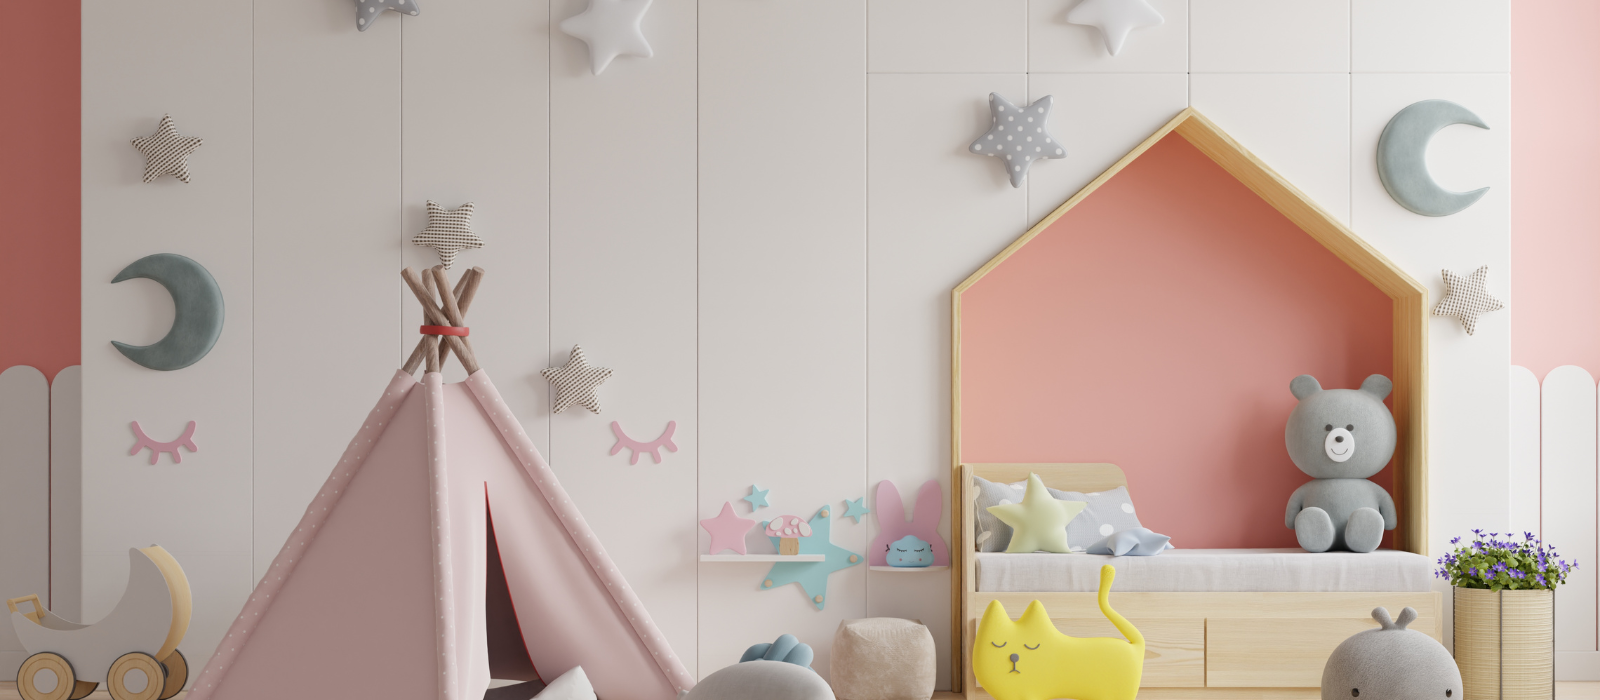 Geometric shapes can be used to add an fun element to a space such as hexagon shapes in a kids room.